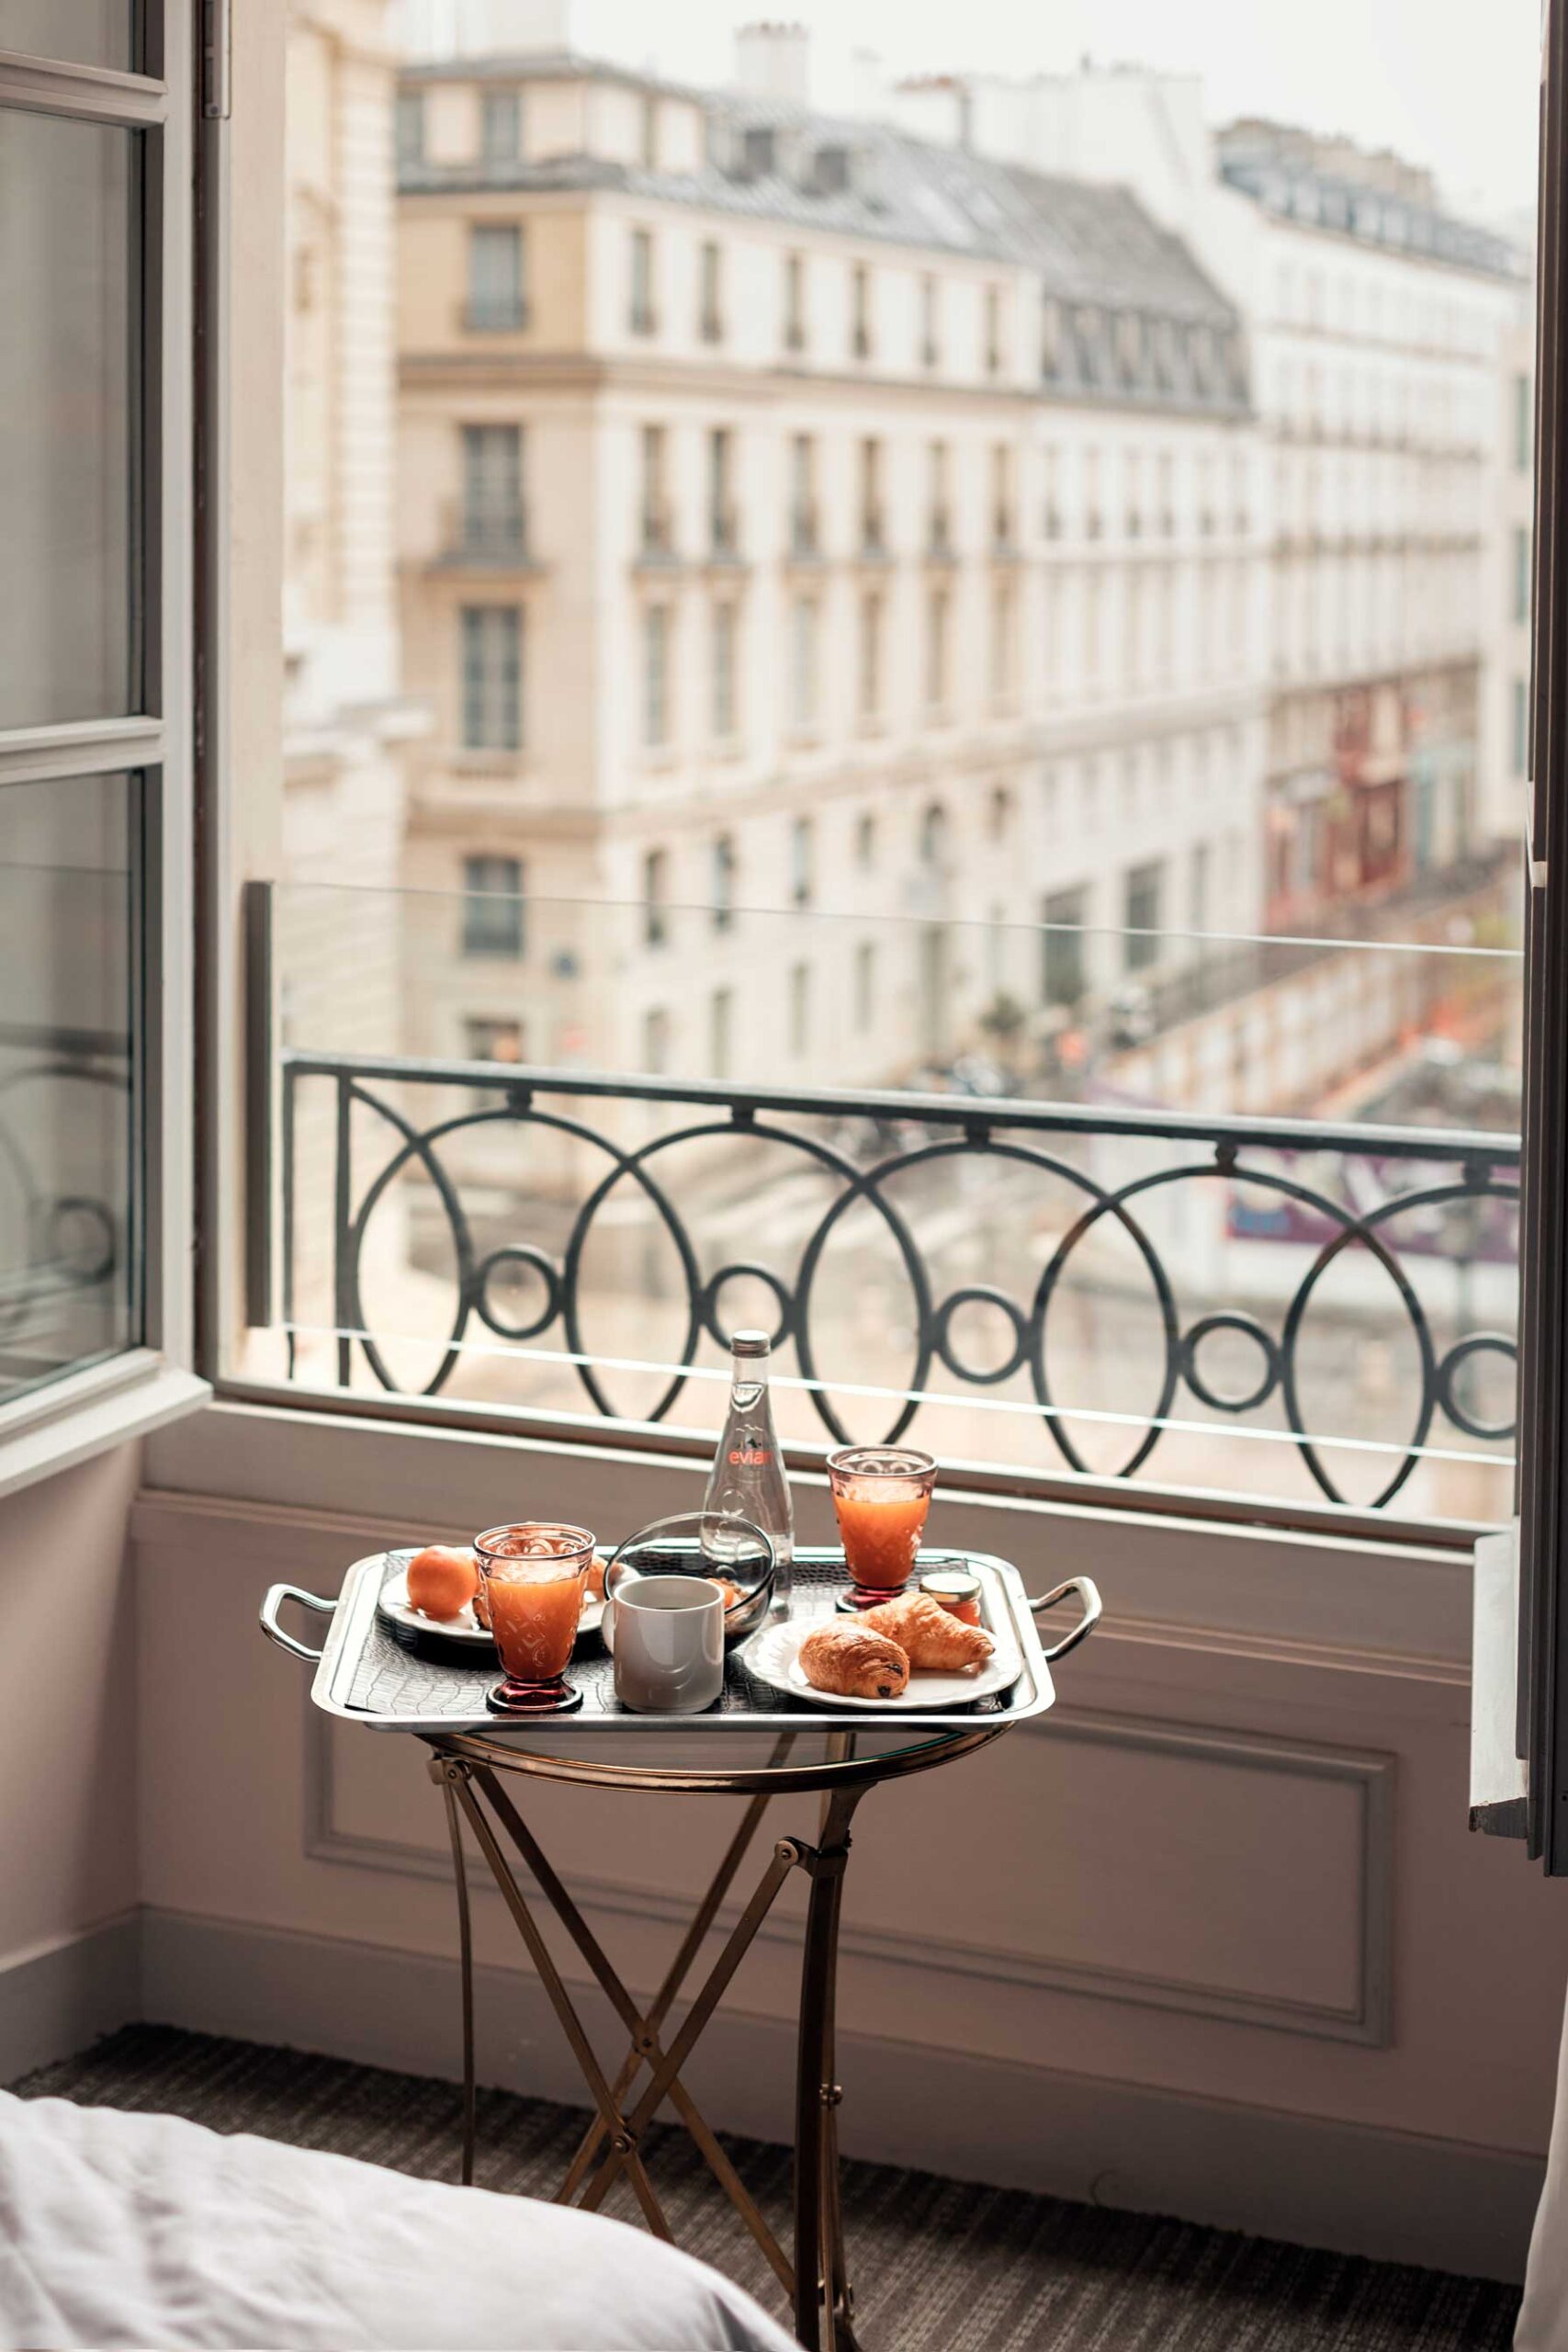 A stay at La Maison Favart, a chic boutique hotel in the center of Paris